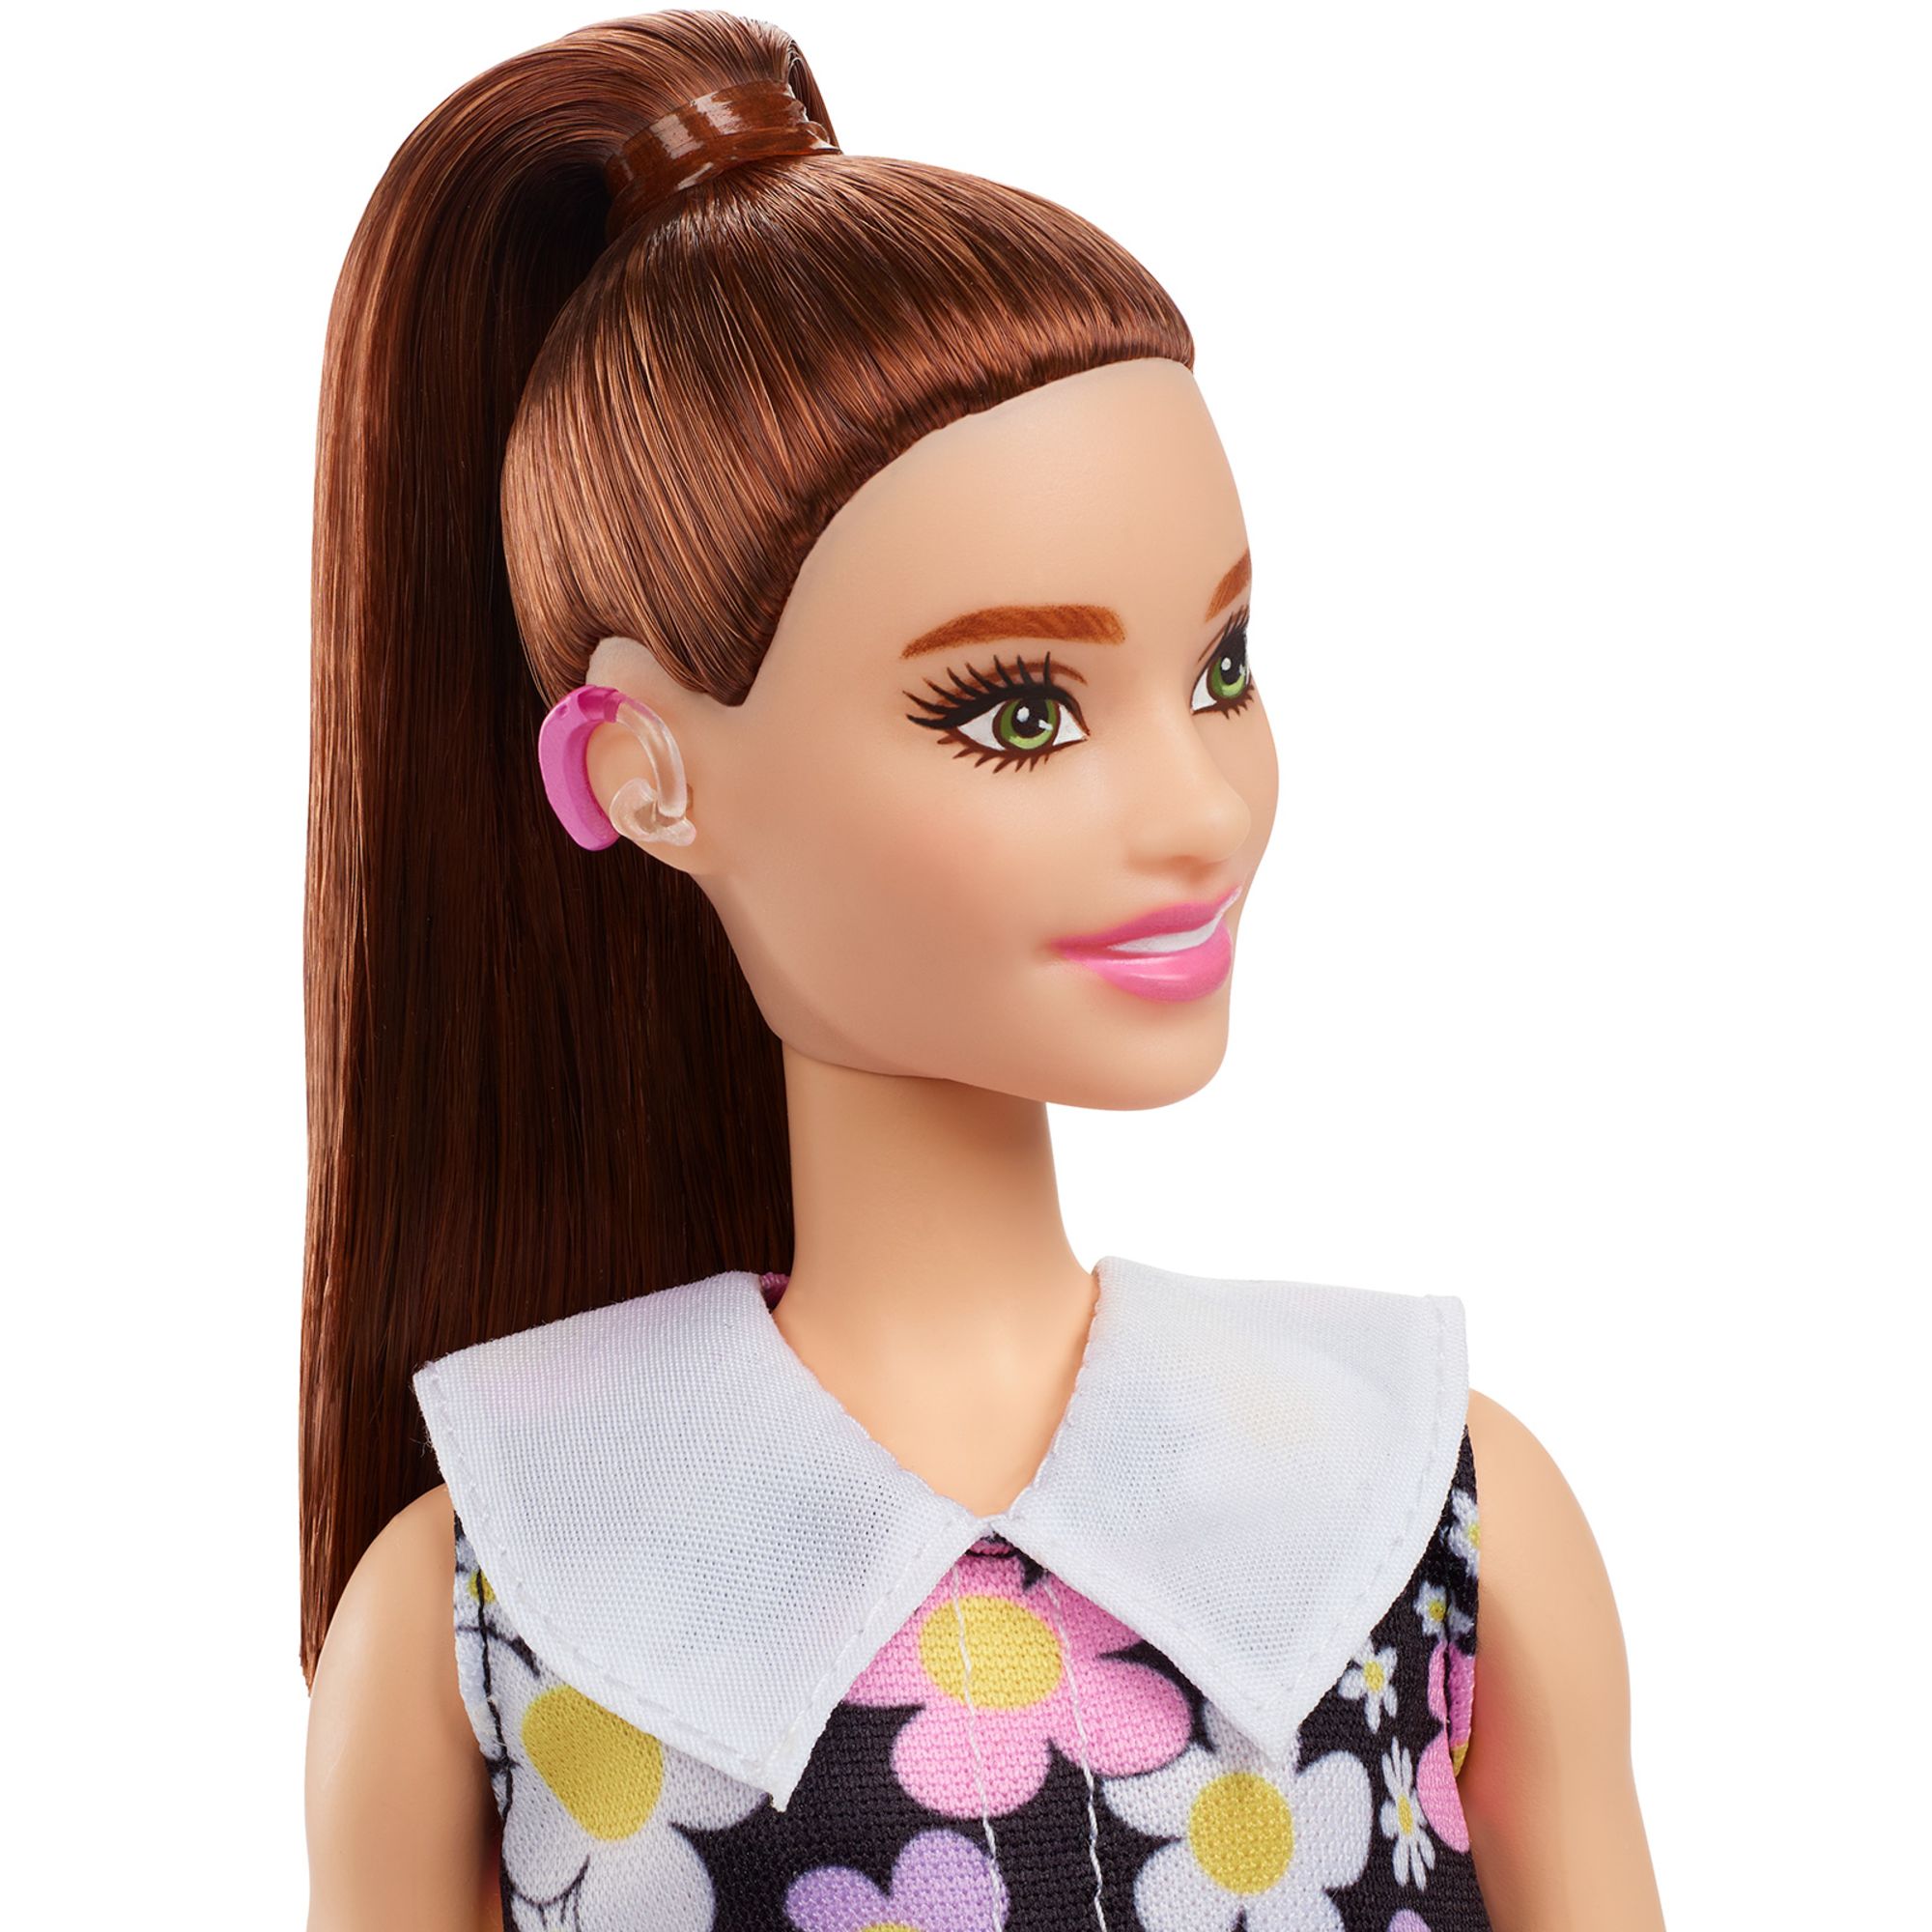 The first Indian Barbie doll is about to change the world